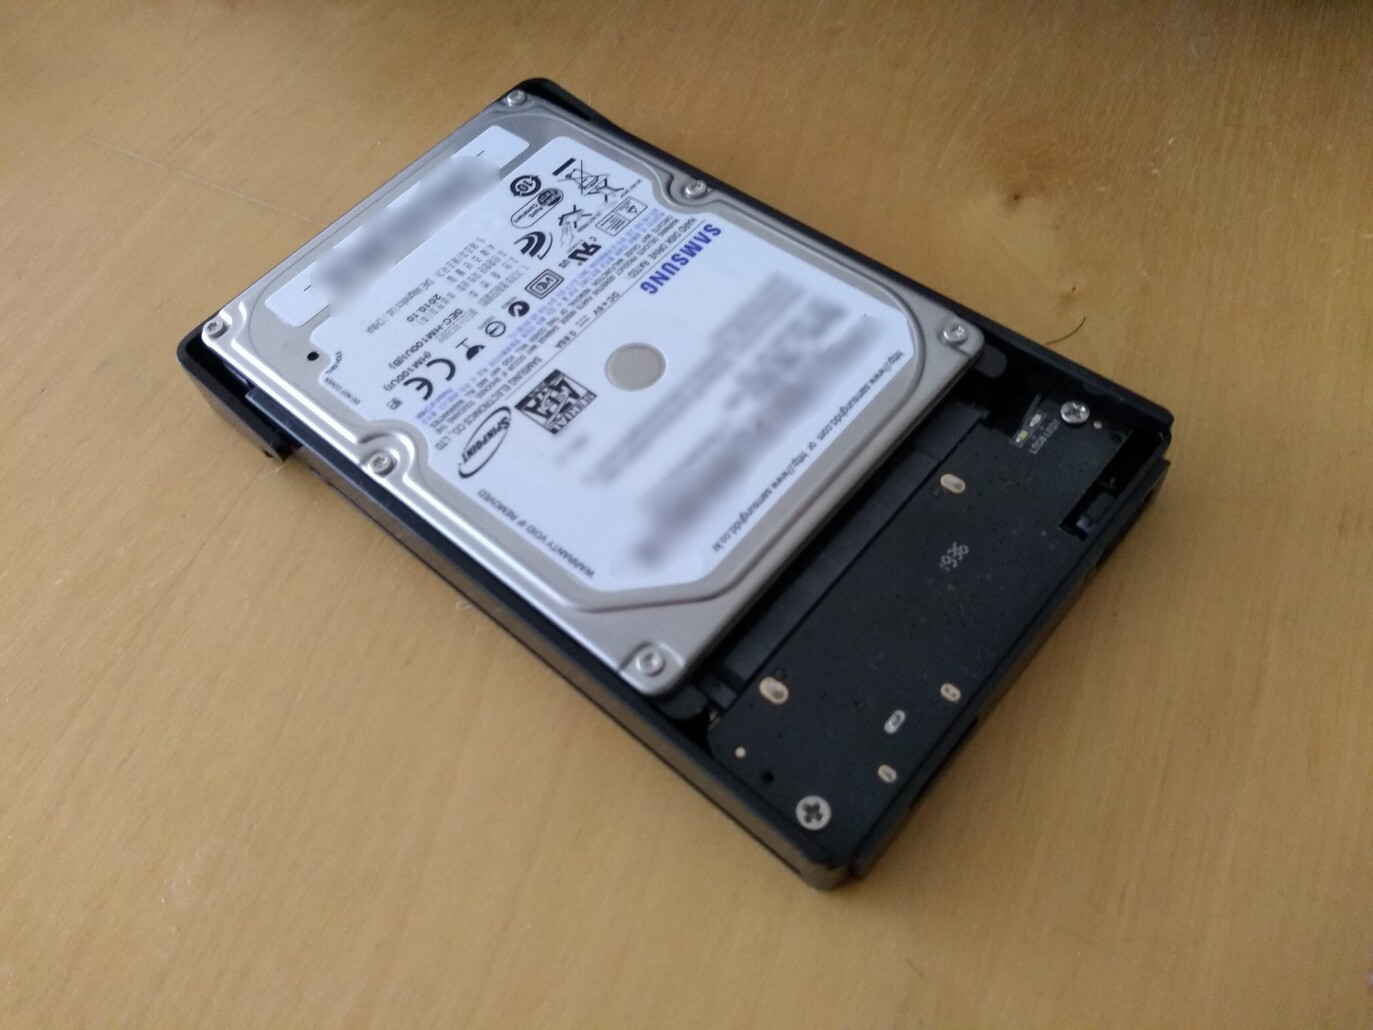 So you have a case for a 2.5'' drive...